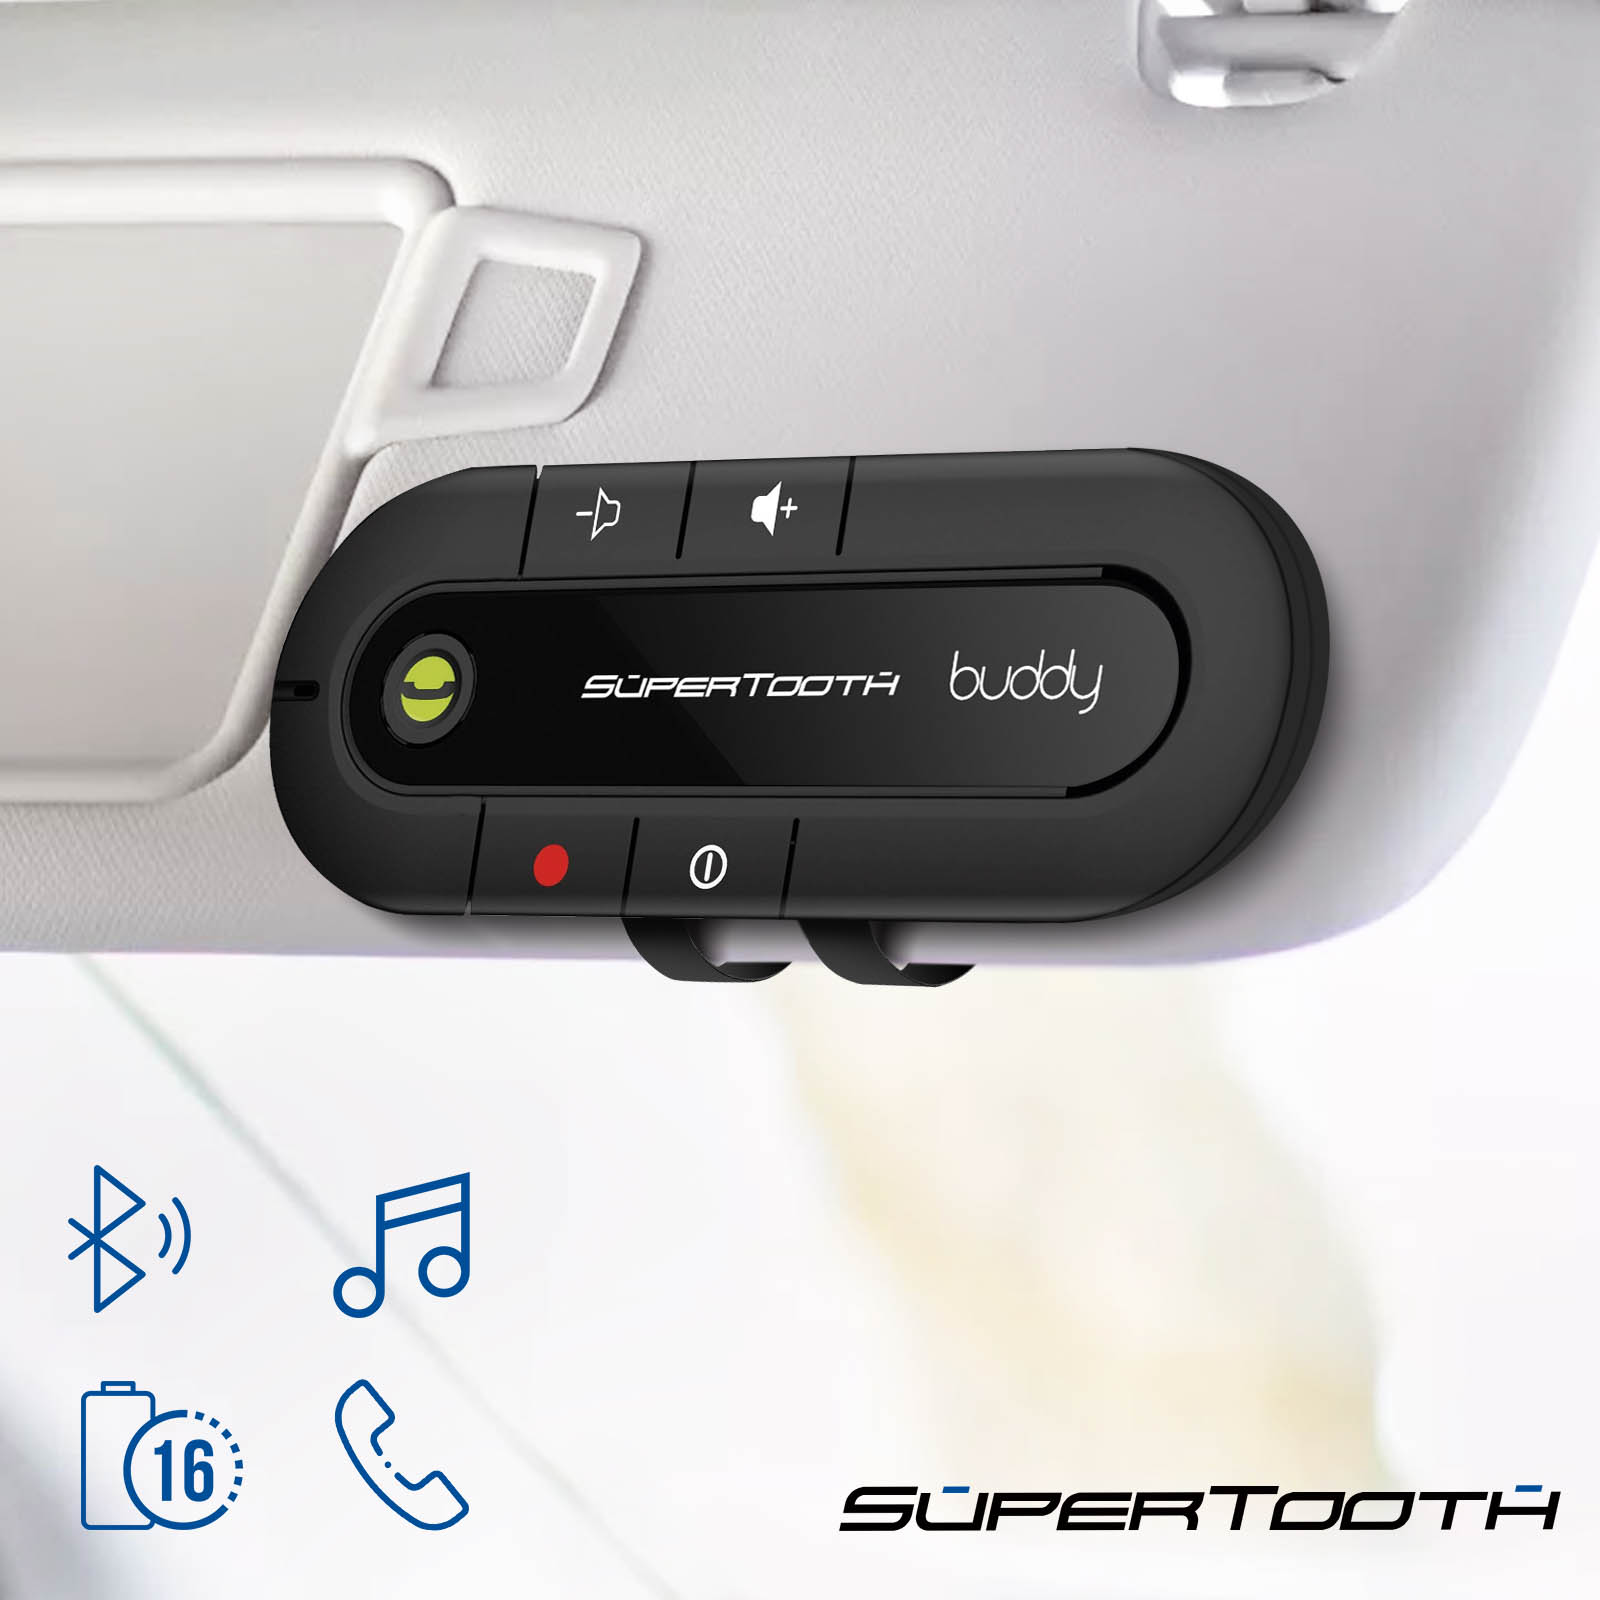 Kits mains libres bluetooth voiture Supertooth Buddy + chargeur voiture 